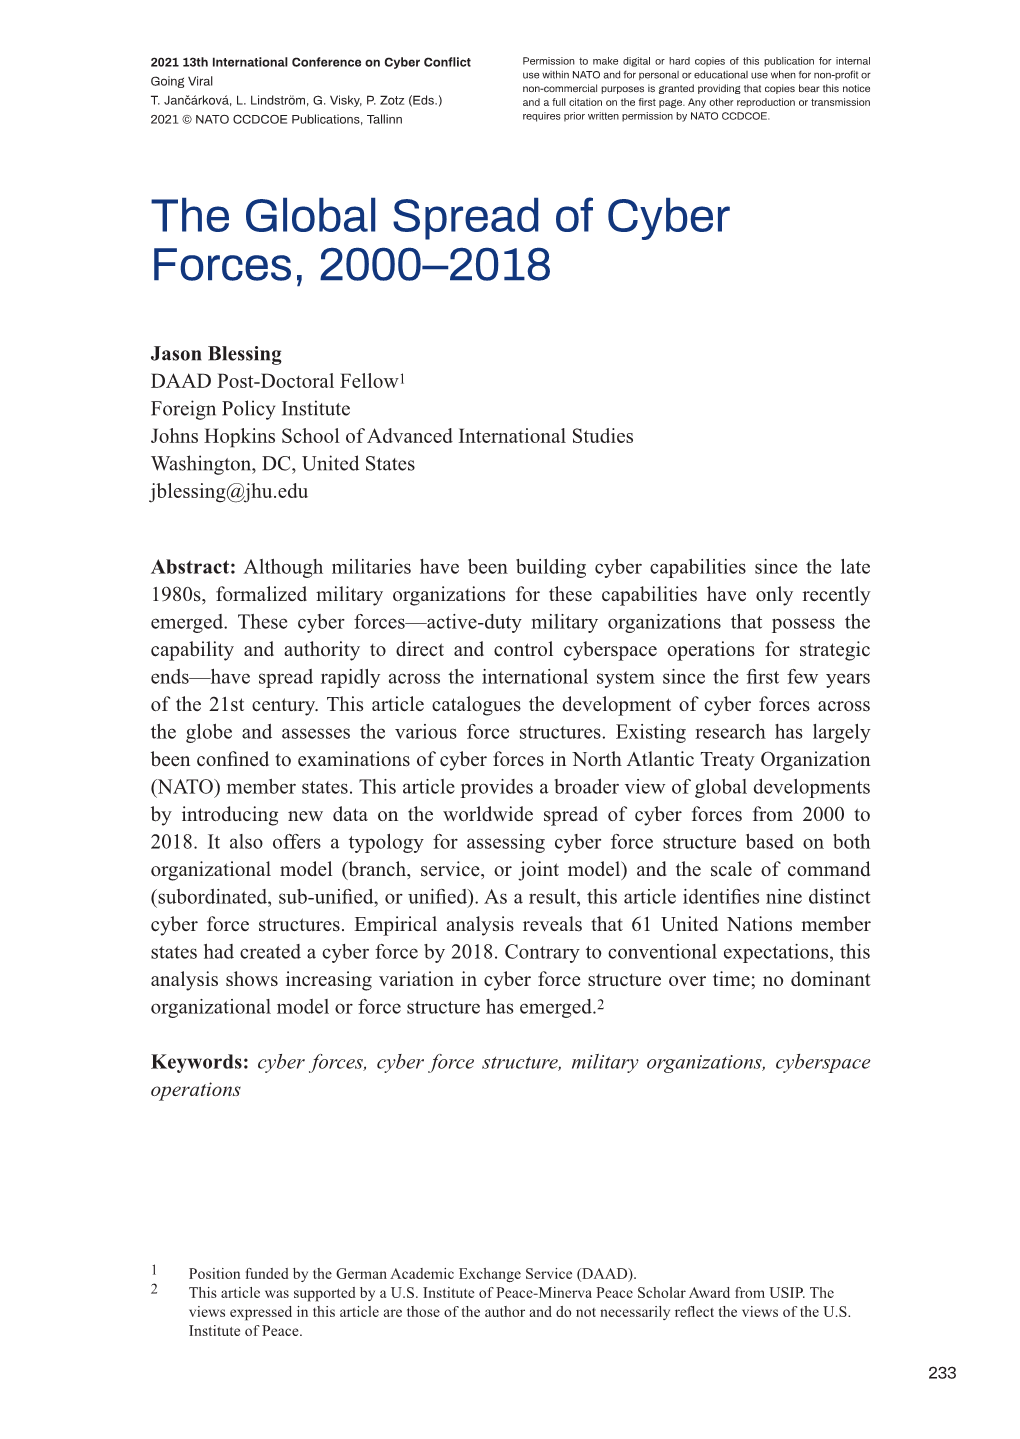 The Global Spread of Cyber Forces, 2000–2018